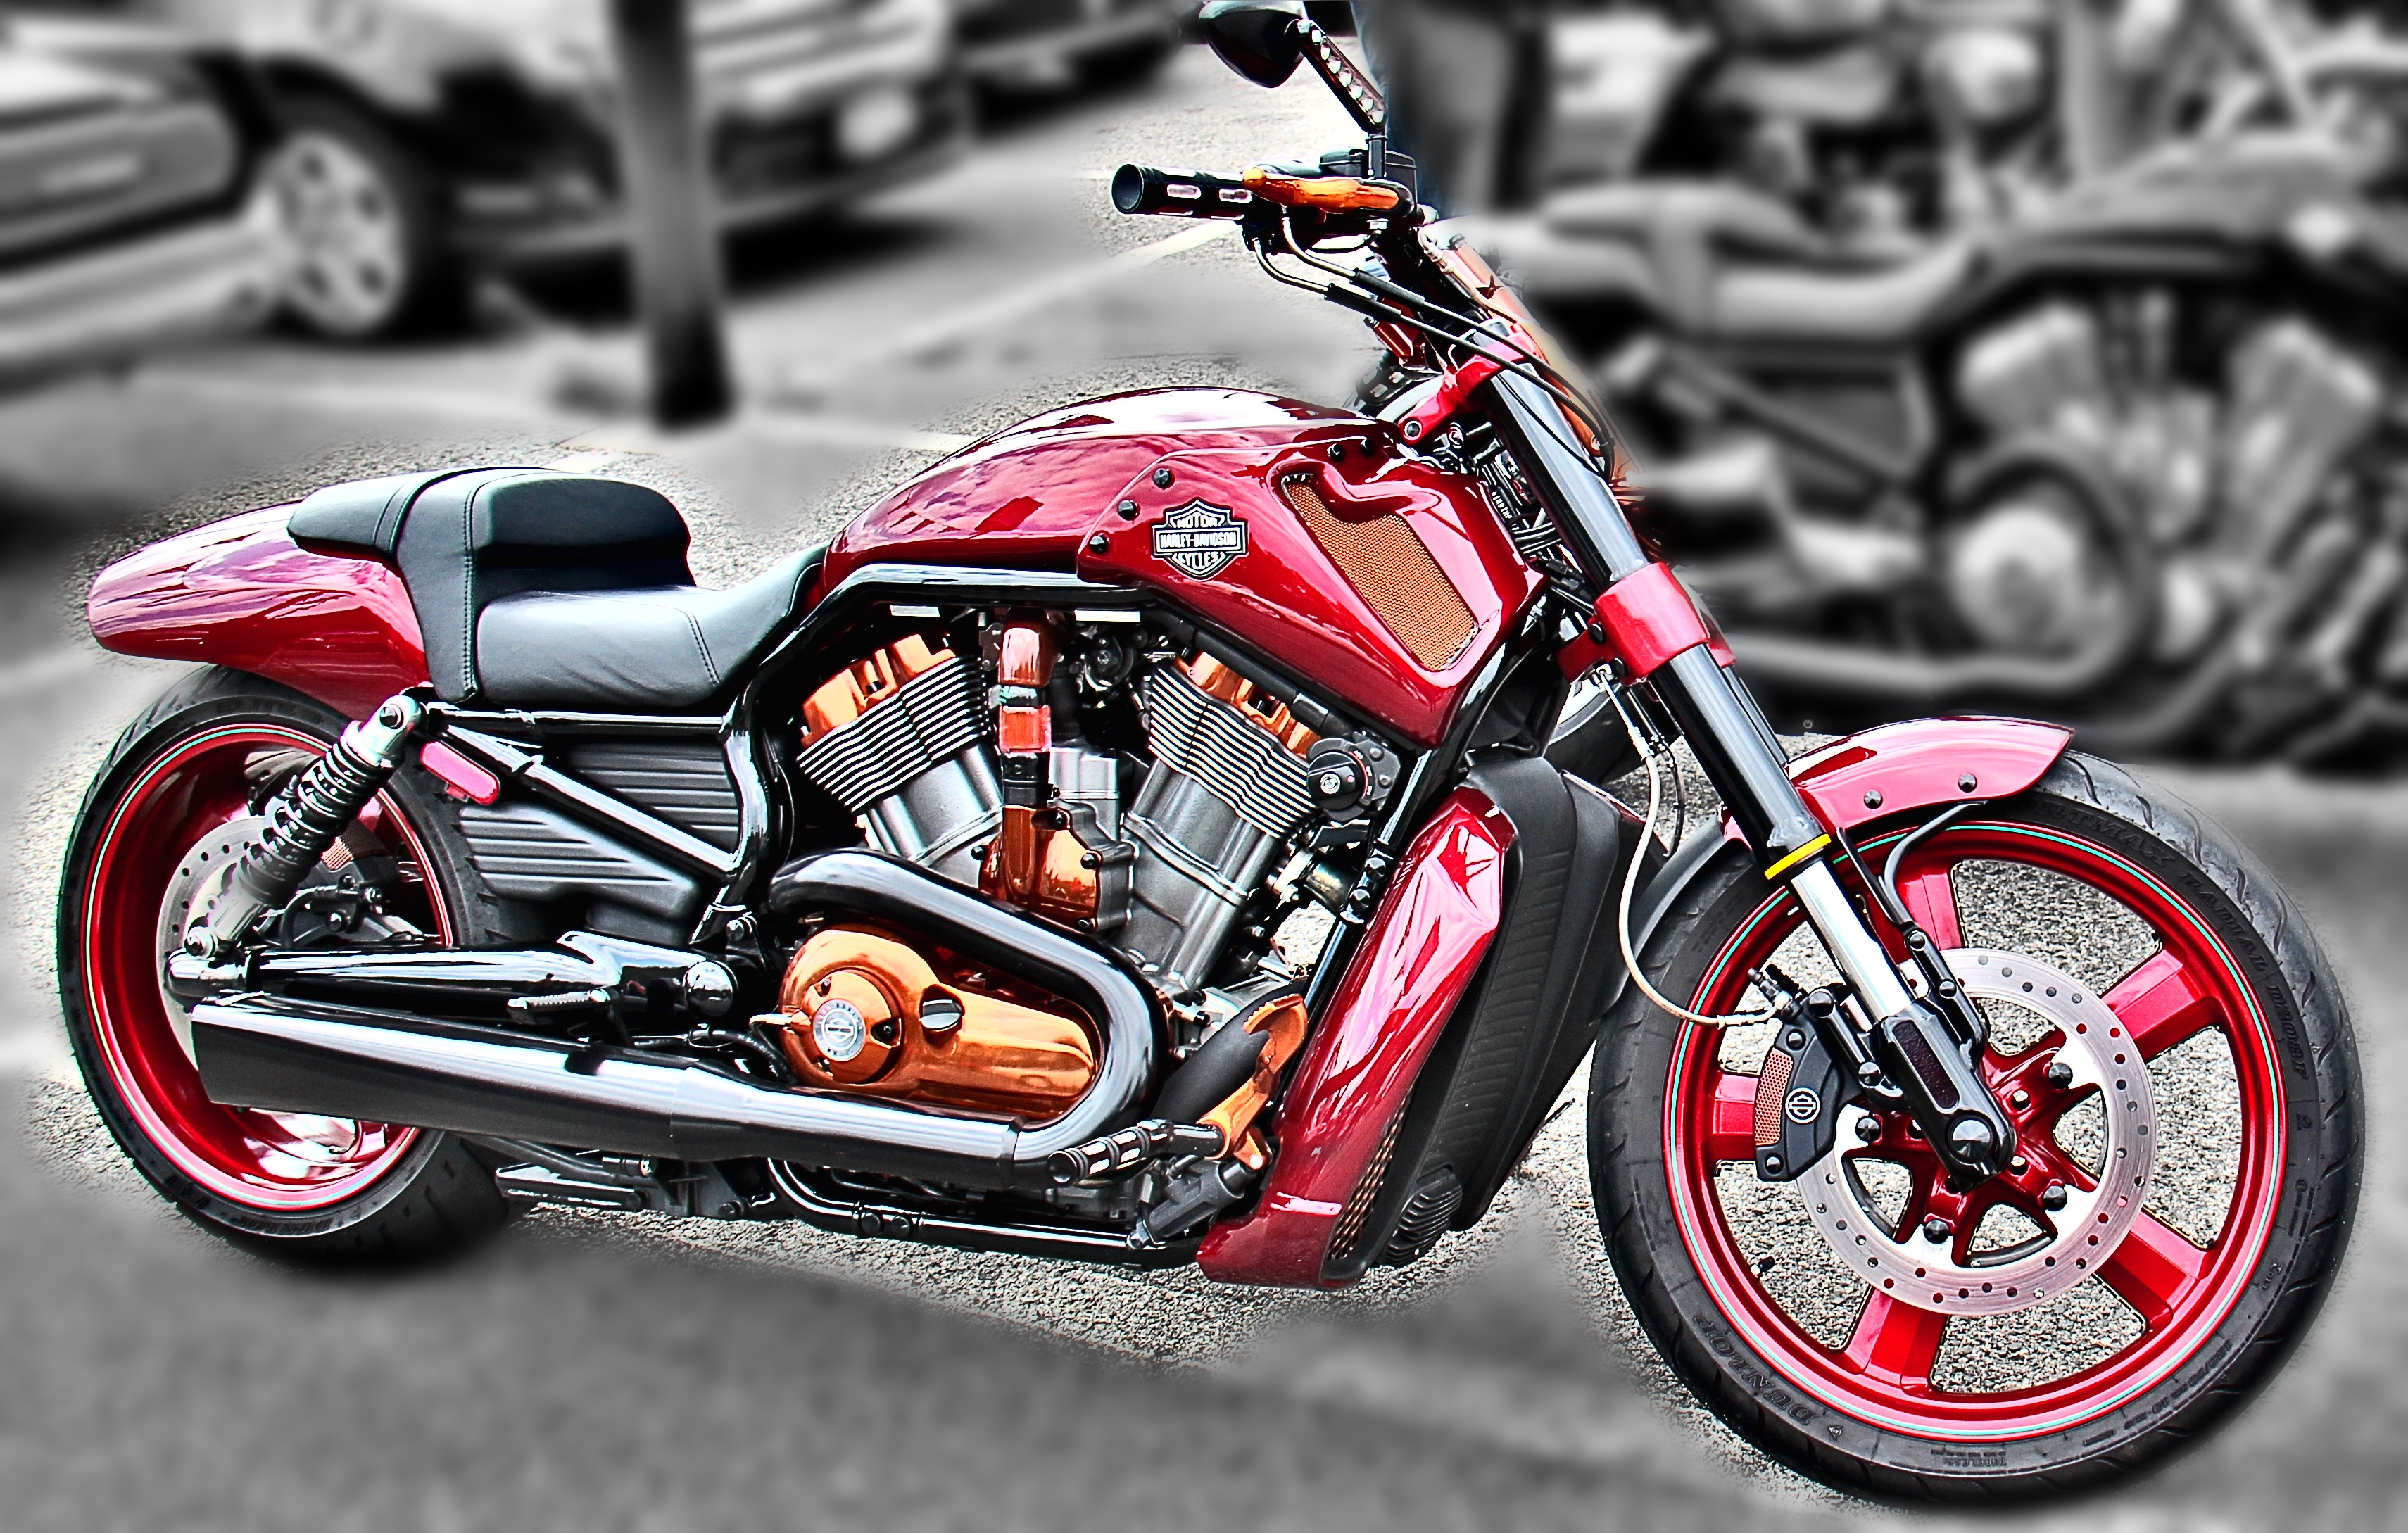 2009 Harley Davidson Vrod. If need for a shoot or movie it is available.